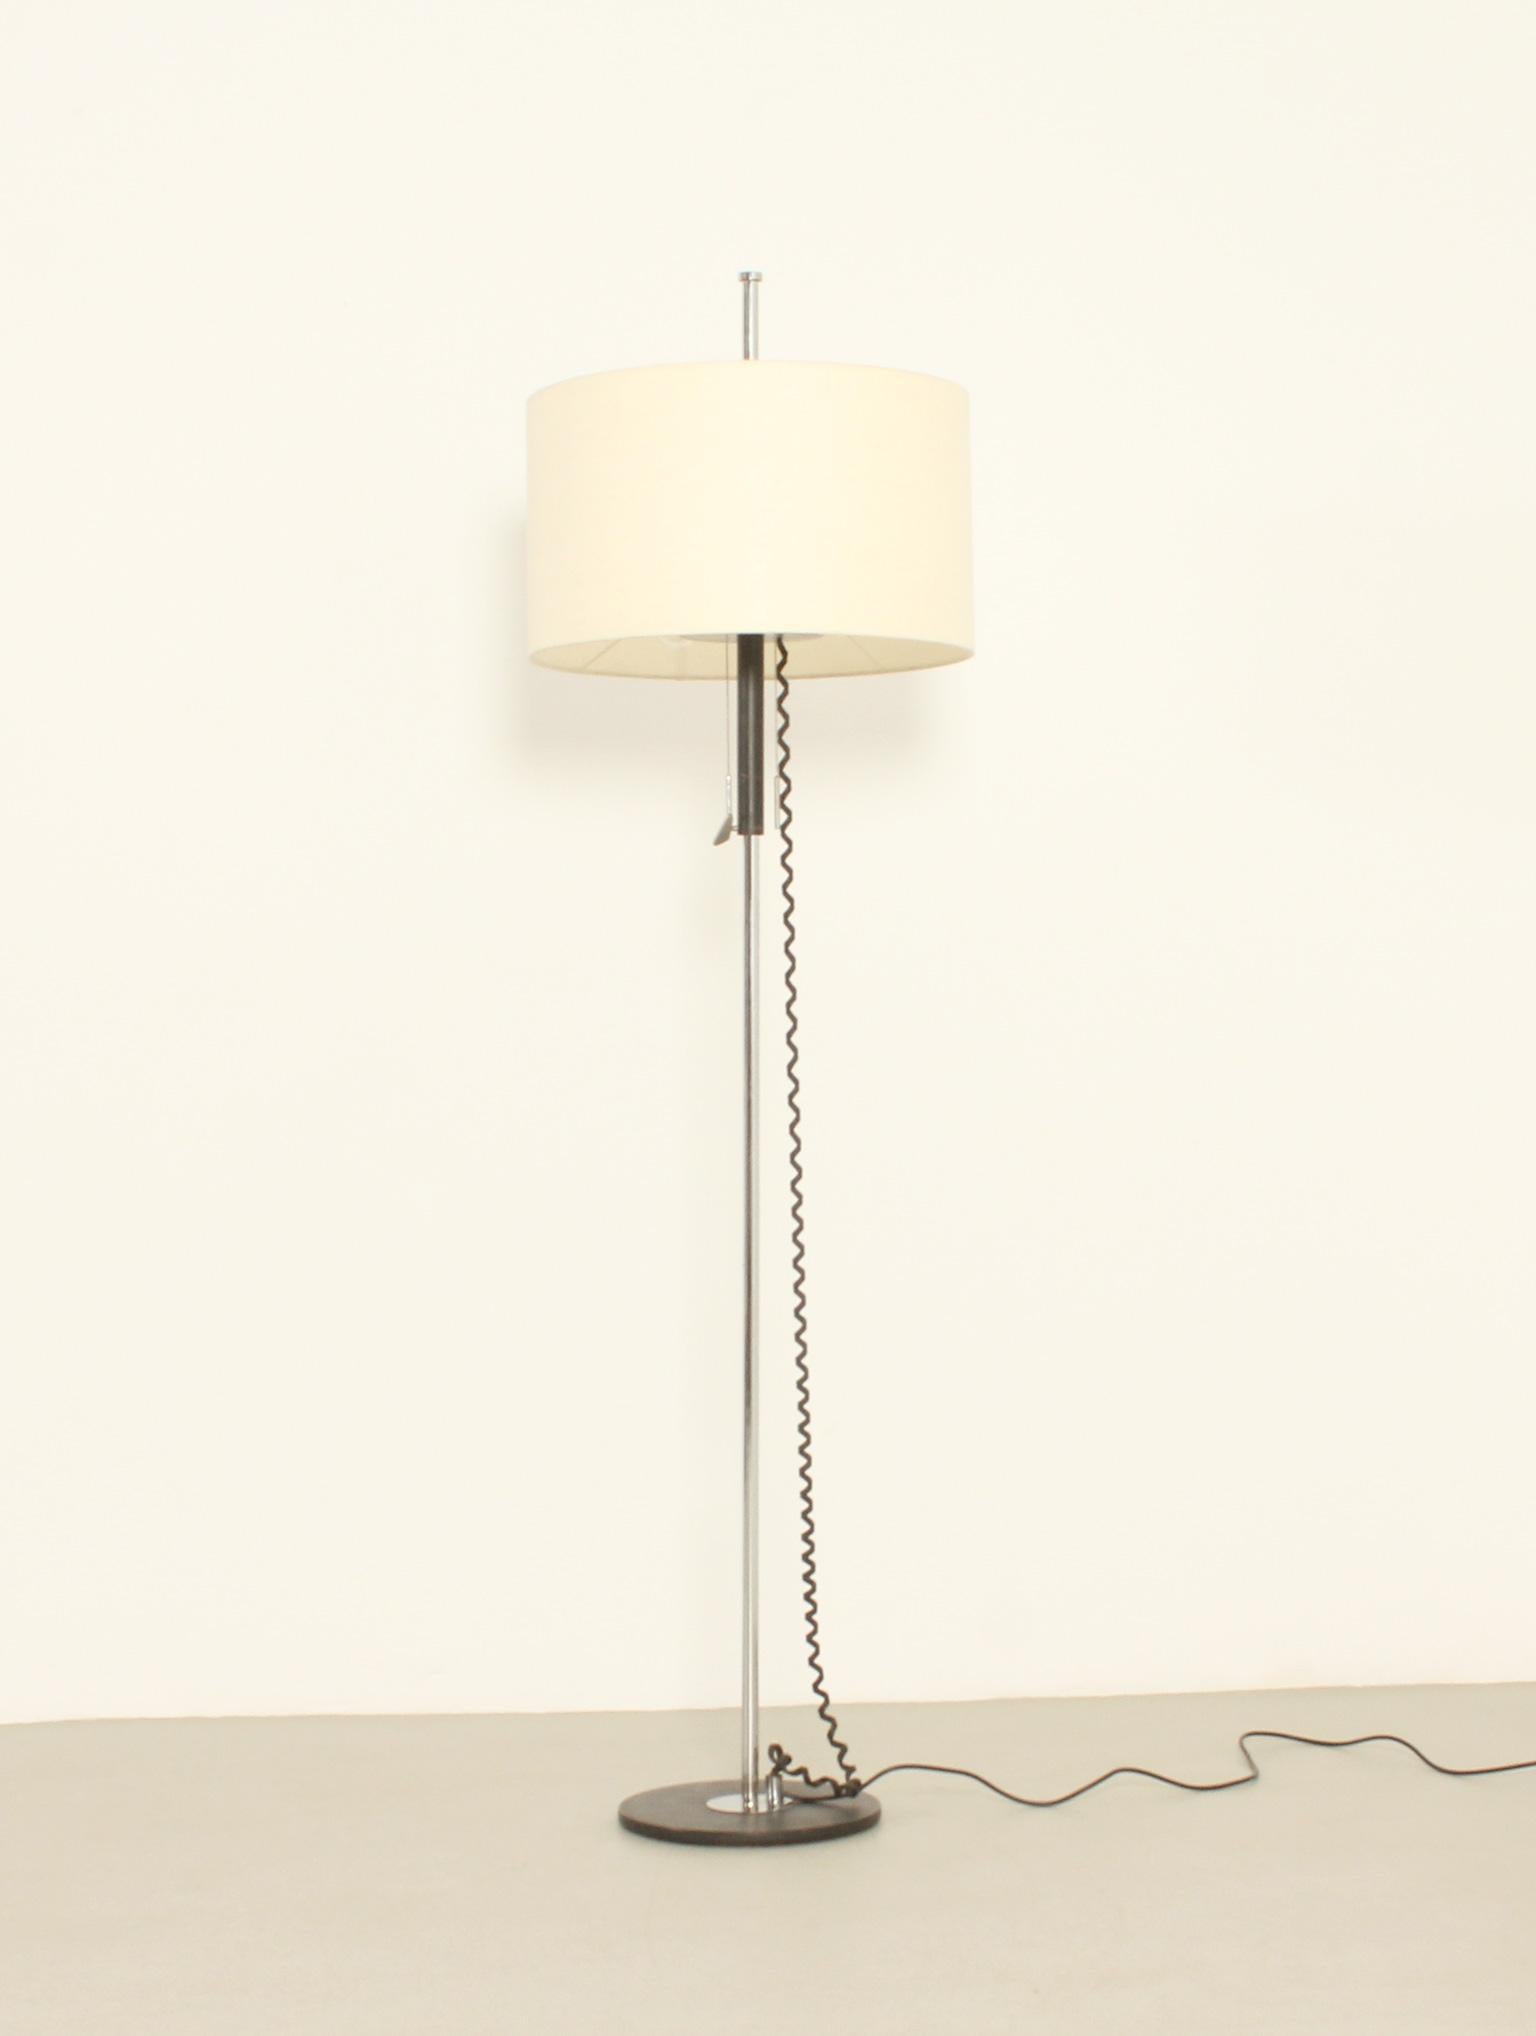 Spanish Floor Lamp with Adjustable Lampshade, Spain, 1960's For Sale